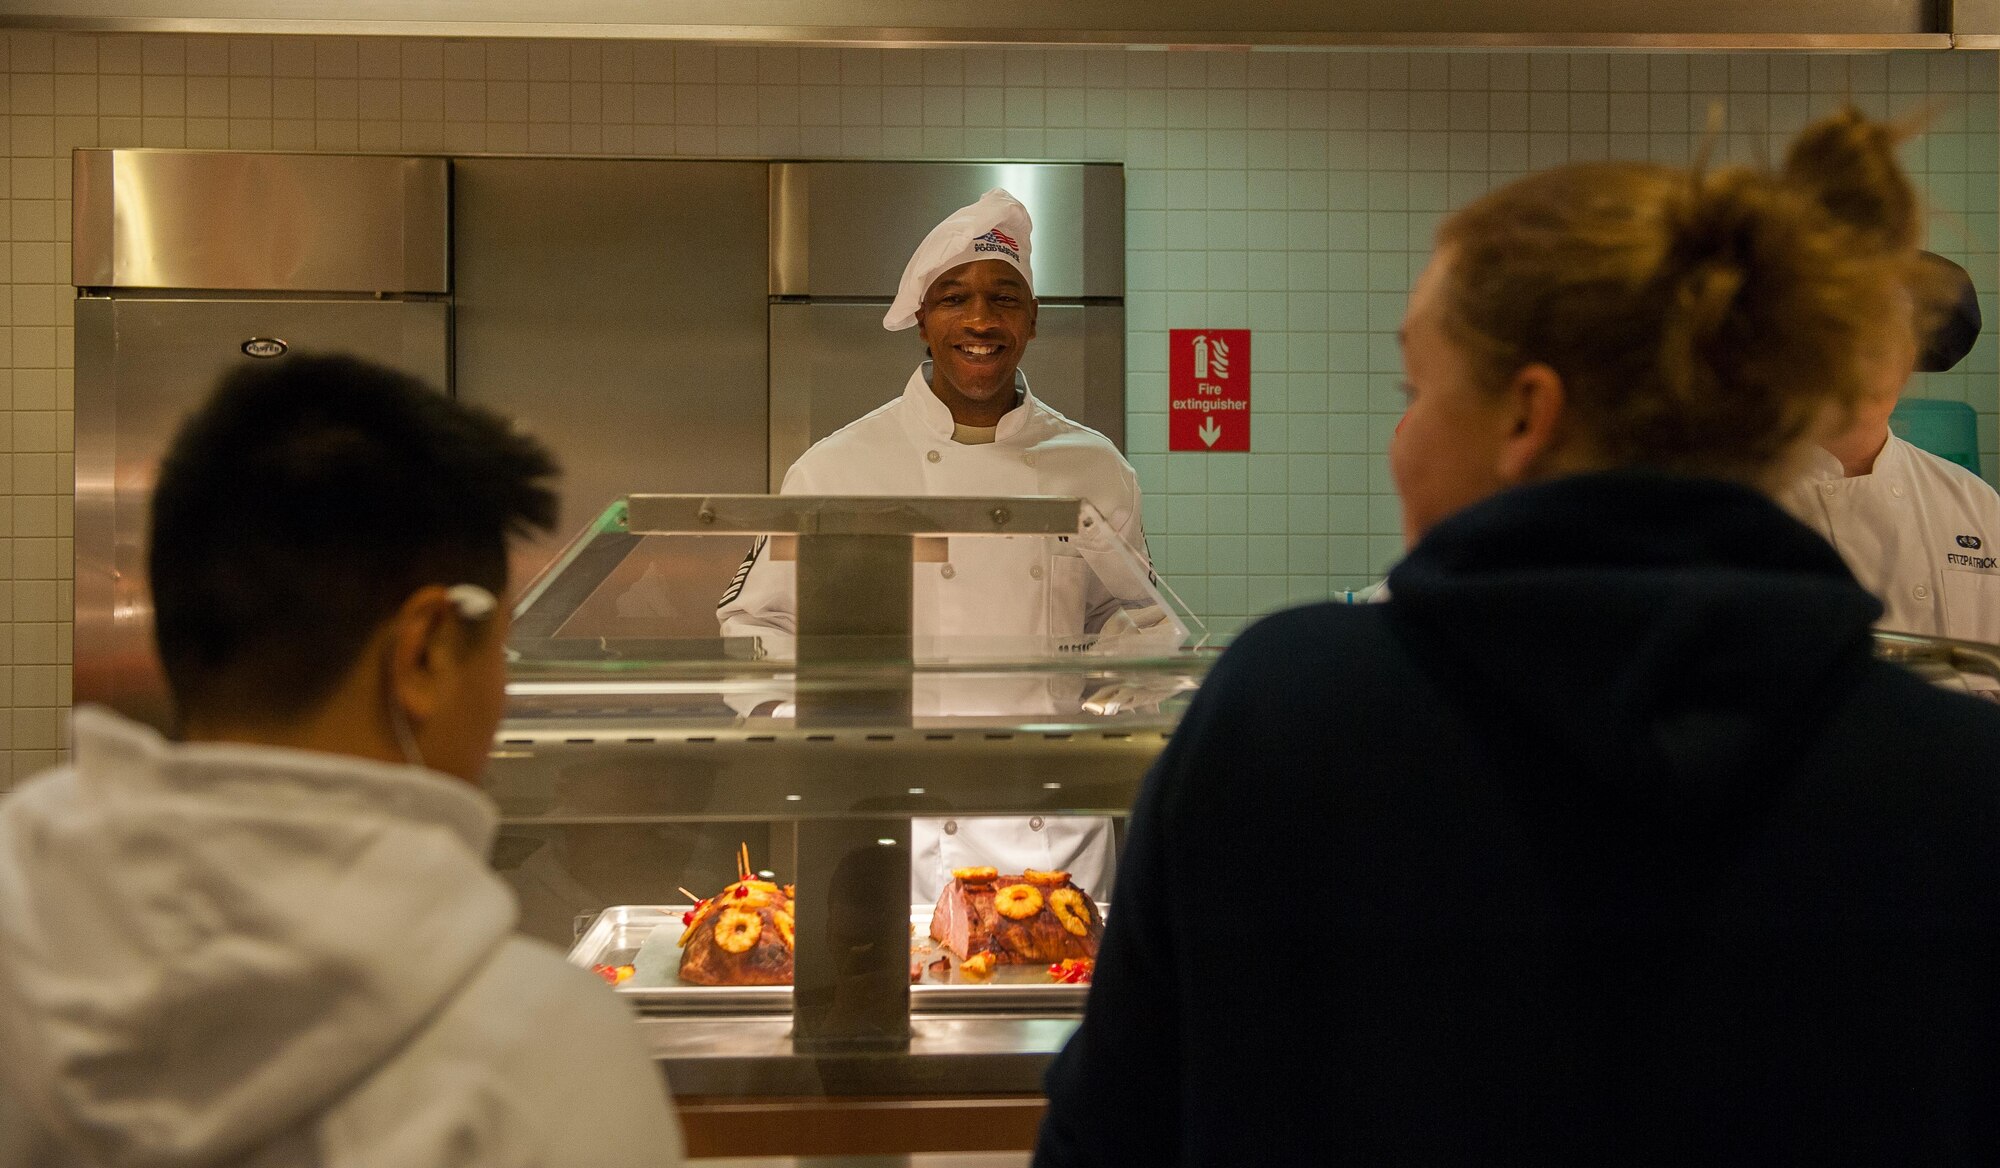 Chief Master Sgt. Kaleth Wright, U.S. Air Forces in Europe and Air Forces Africa command chief serves Airmen during a Thanksgiving meal at Ramstein Air Base, Germany, Nov. 24, 2016. The event was open to all DoD ID card holders, retirees and family members. Senior leaders serving meals on Thanksgiving to Airmen and their families is a longstanding tradition that allows them to spend time with servicemembers during the holiday. In the U.S., the modern Thanksgiving holiday tradition can trace its origins back to 1621 in the heart of a newly-founded city called Plymouth in present-day Massachusetts. However, the first nationwide Thanksgiving proclamation was made by the first president of the U.S., George Washington, in 1789. Since then, the holiday has been celebrated by an entire nation to recount the blessings of the year. (U.S. Air Force photo by Airman 1st Class Lane T. Plummer)